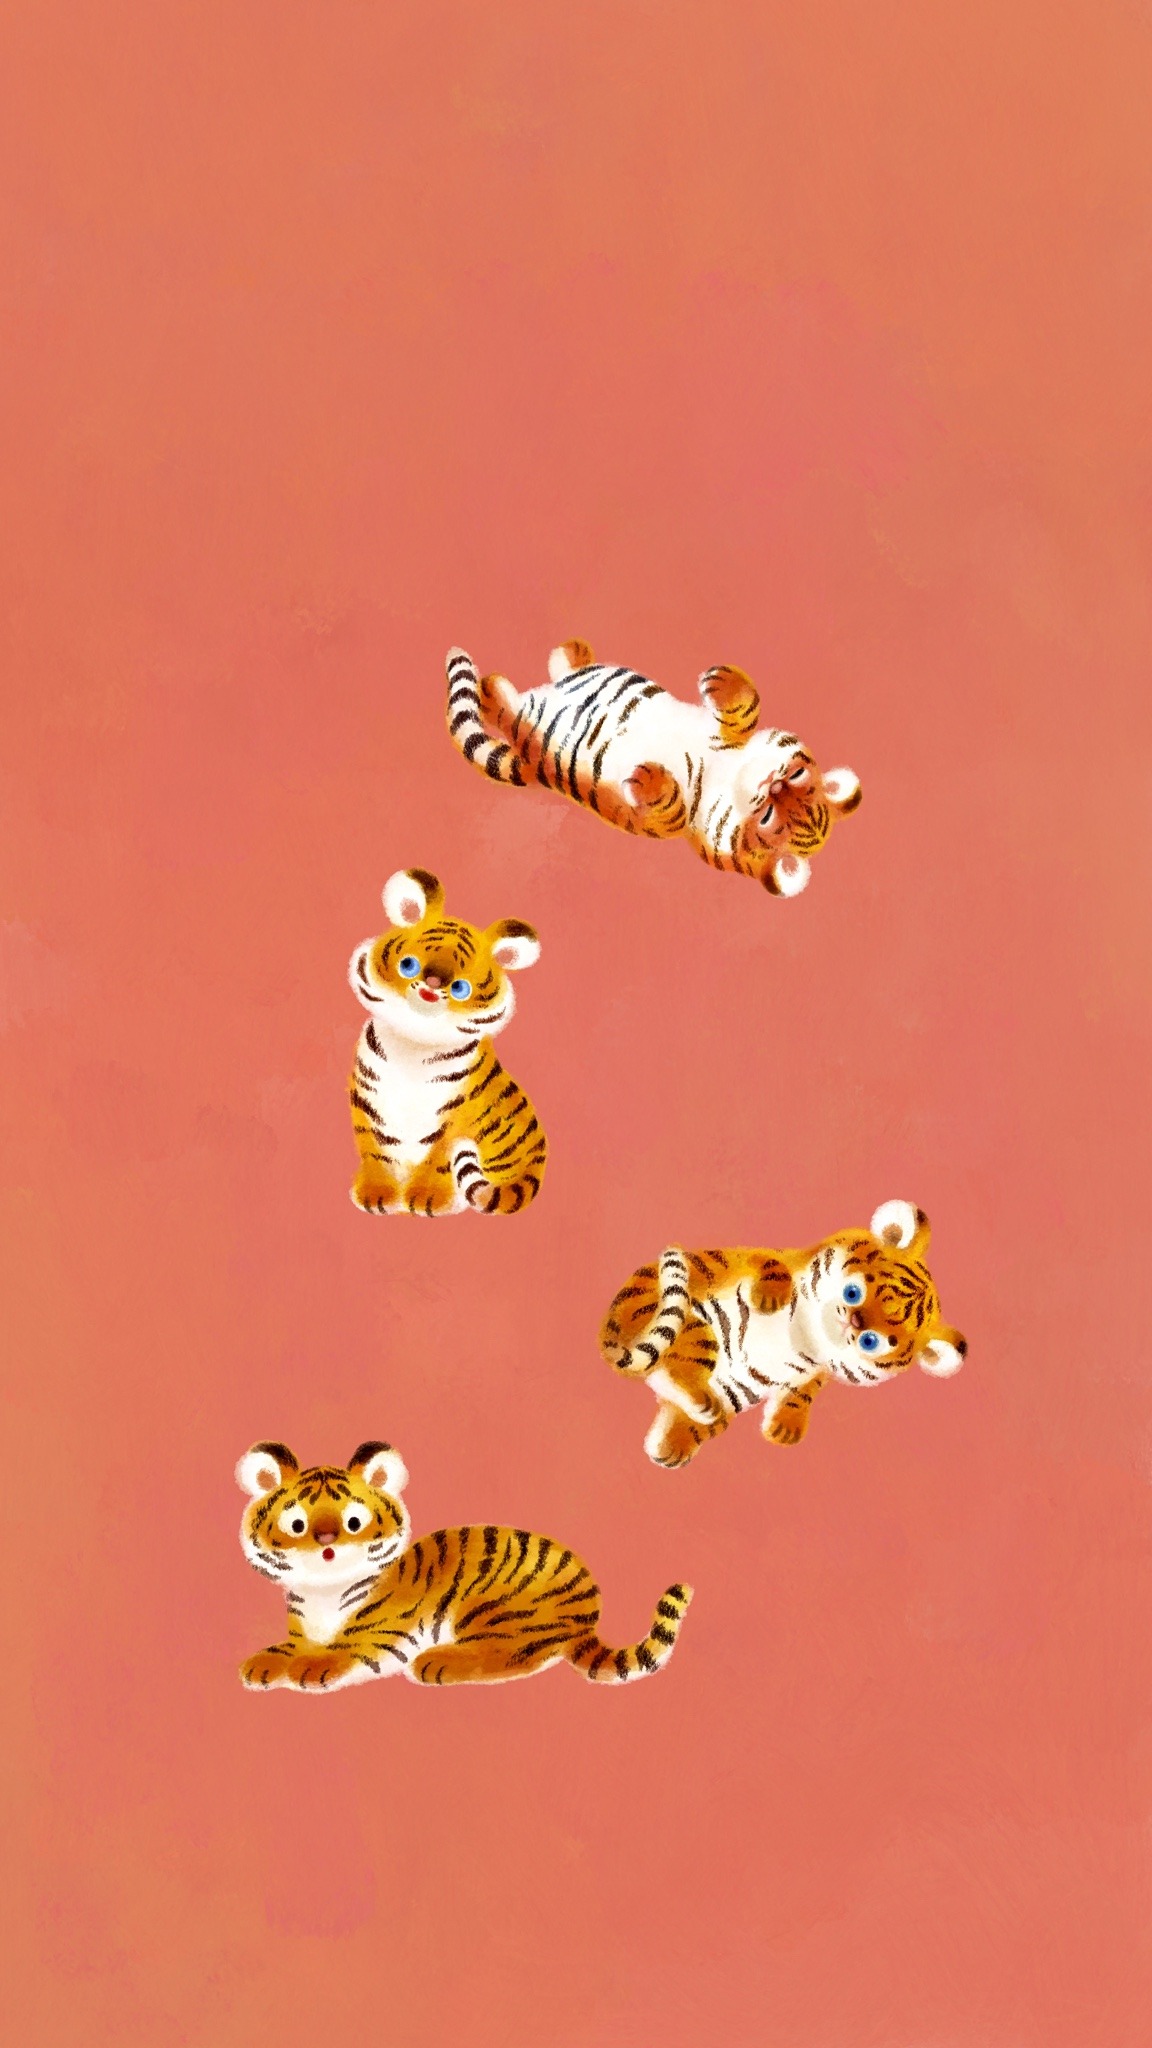 omochi-freedom:Baby tigers wallpaper!🐯🐯🐯🐯よかったら壁紙に使ってくださいPlease use them as wallpaper if you like!